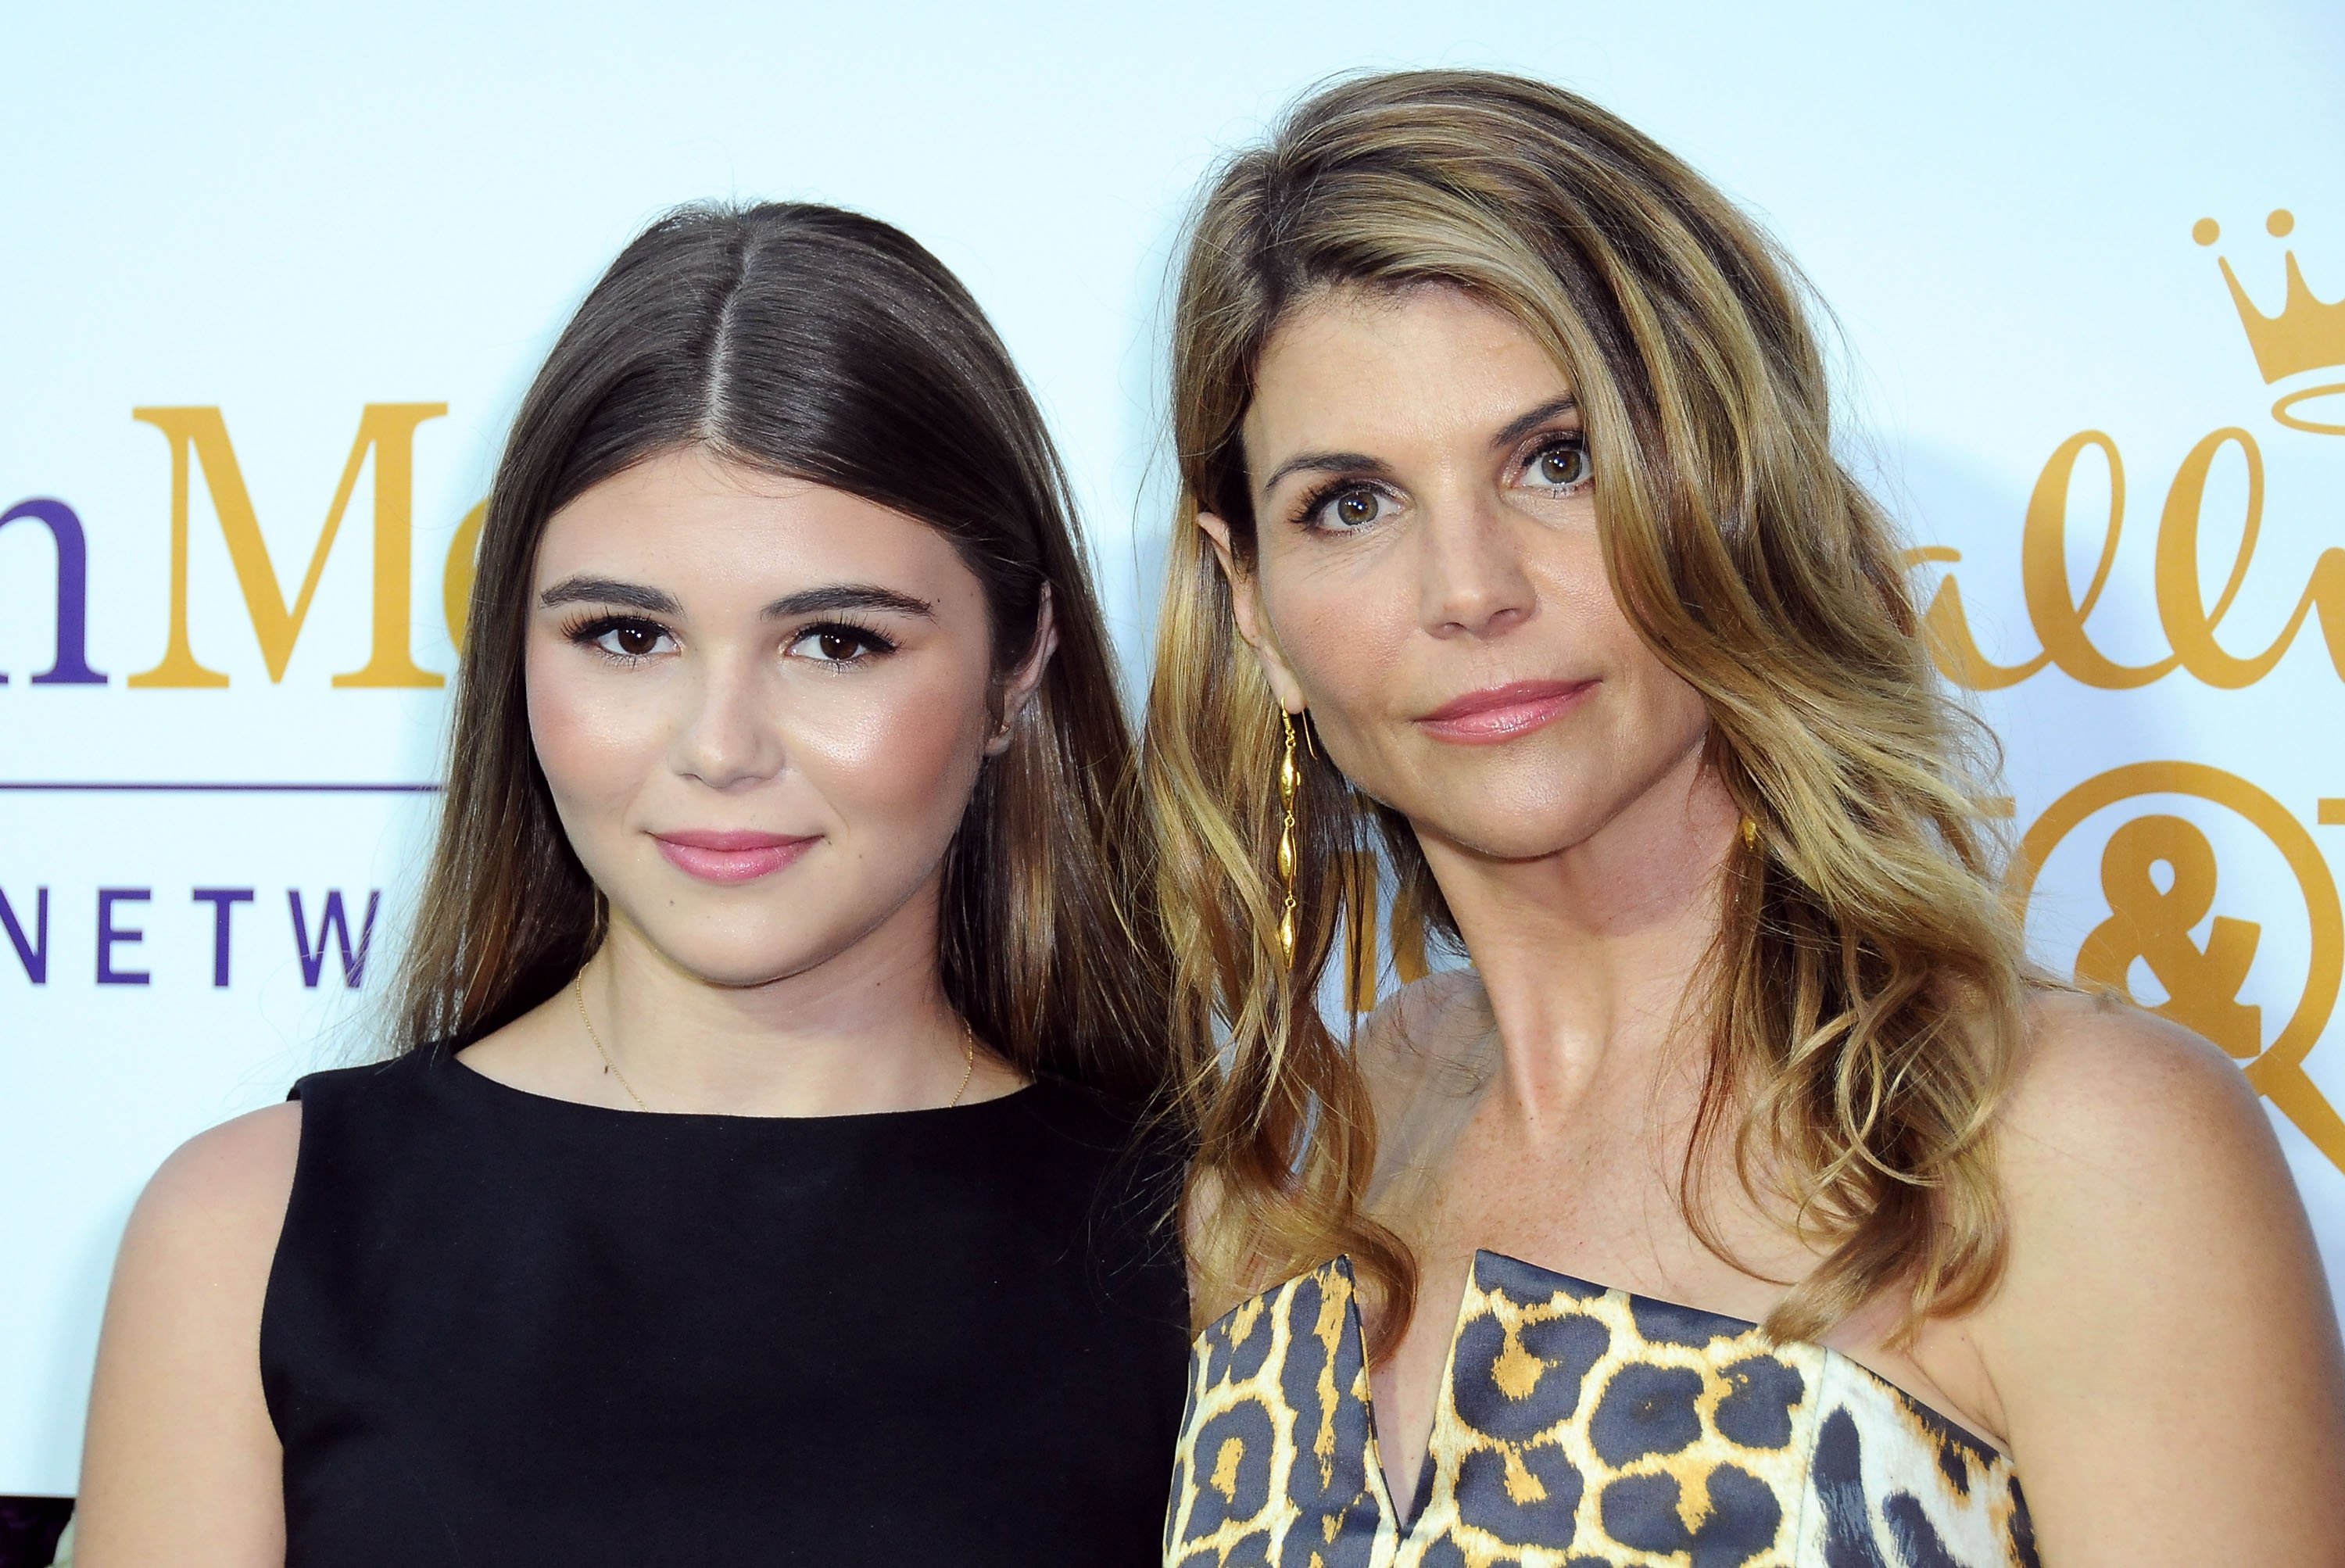 Olivia Jade Giannulli with her mother, Lori Loughlin at a Hallmark event in July 2015. | Photo: Getty Images